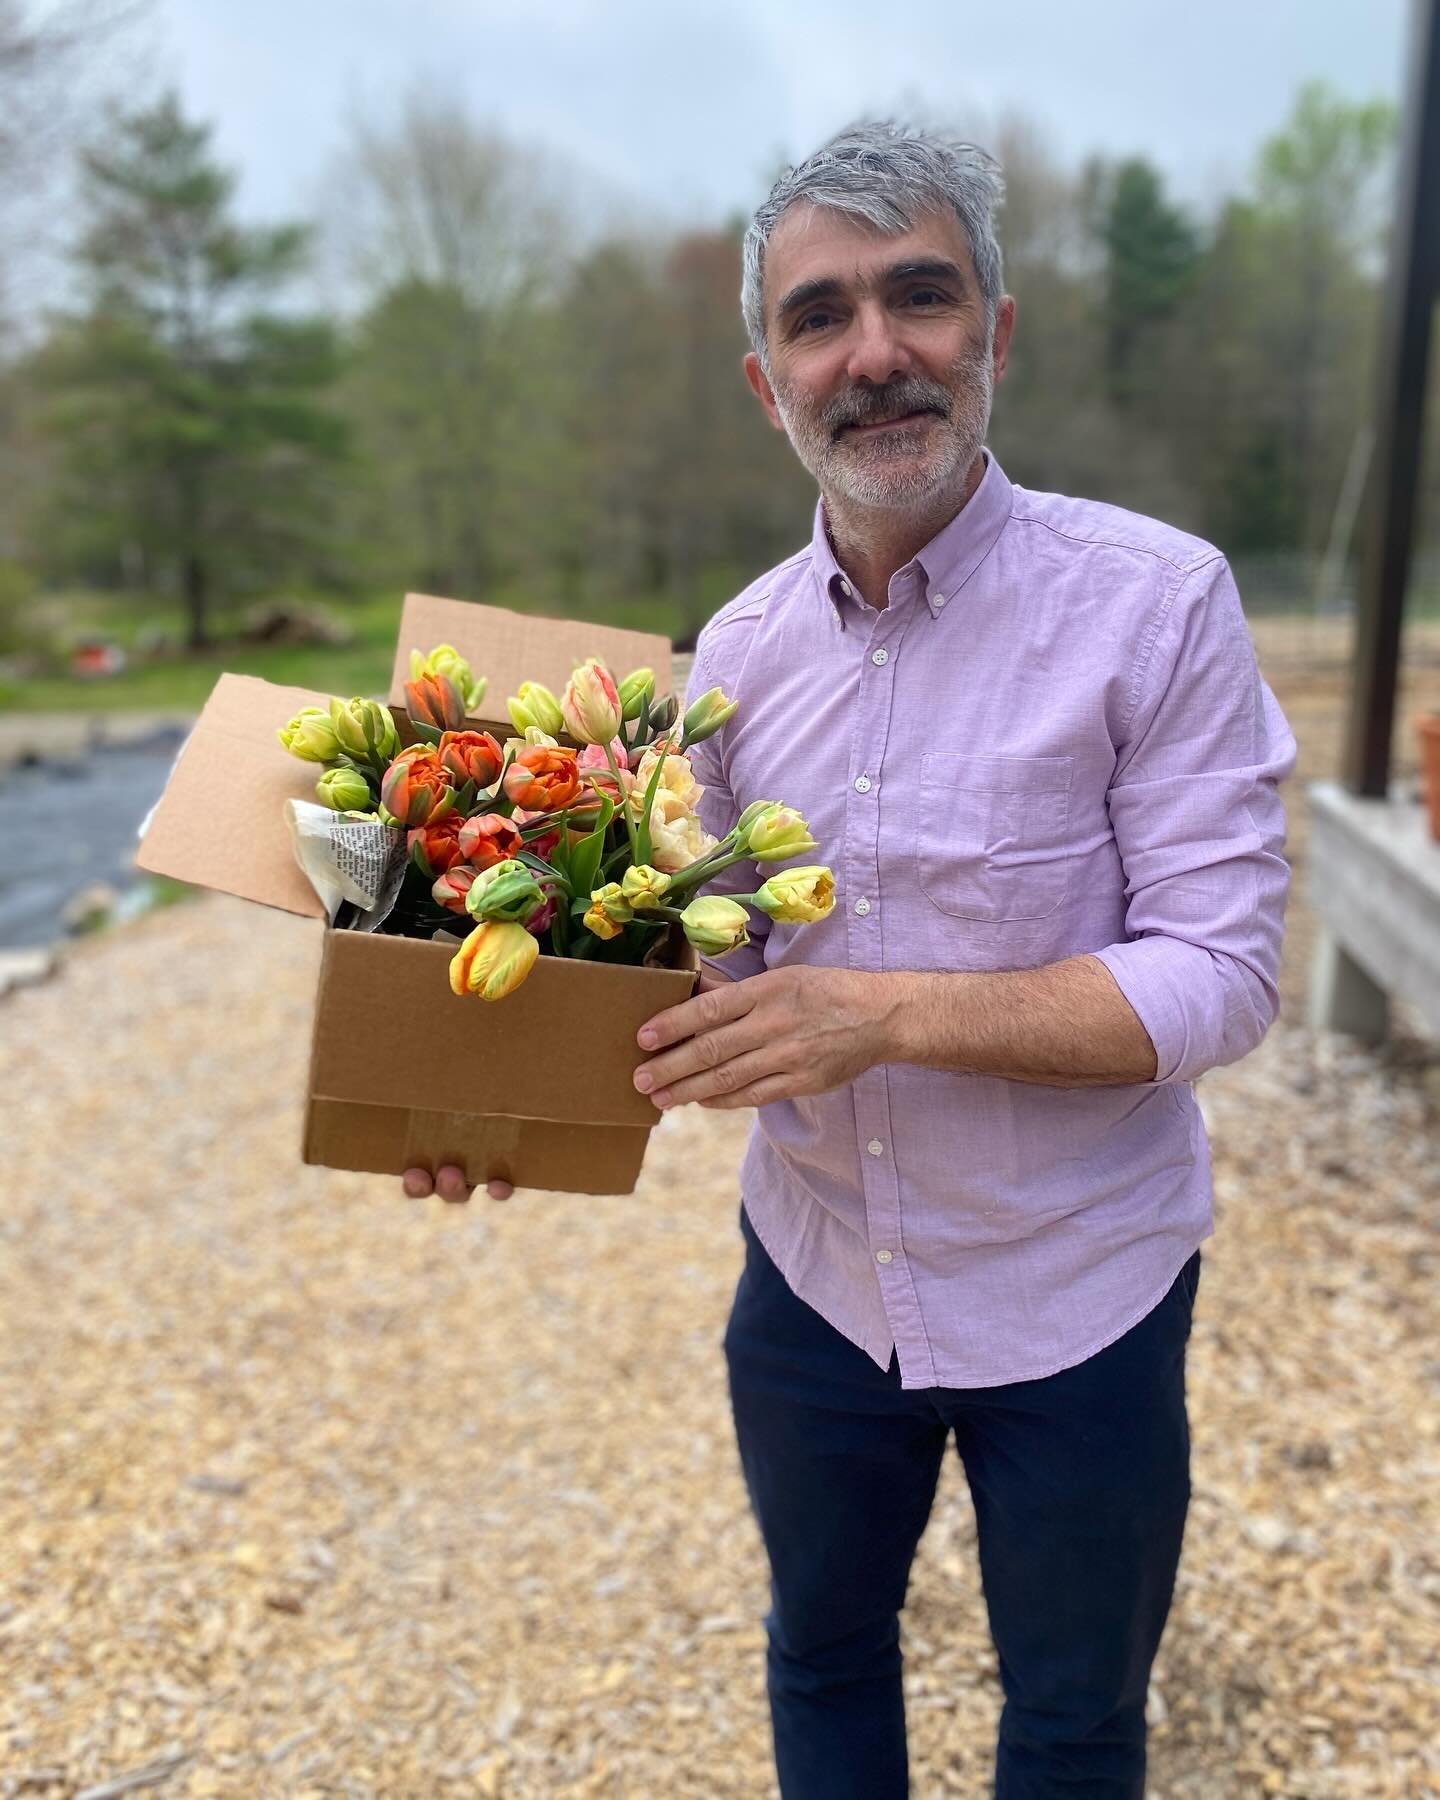 Tulip and daffodil joy continues while it lasts. Hundreds of stems went to #wiscassetmiddlehighschool and the #newcastleecumenicalfoodpantry this morning to create #flowerjoy and Alain was a happy deliverer.